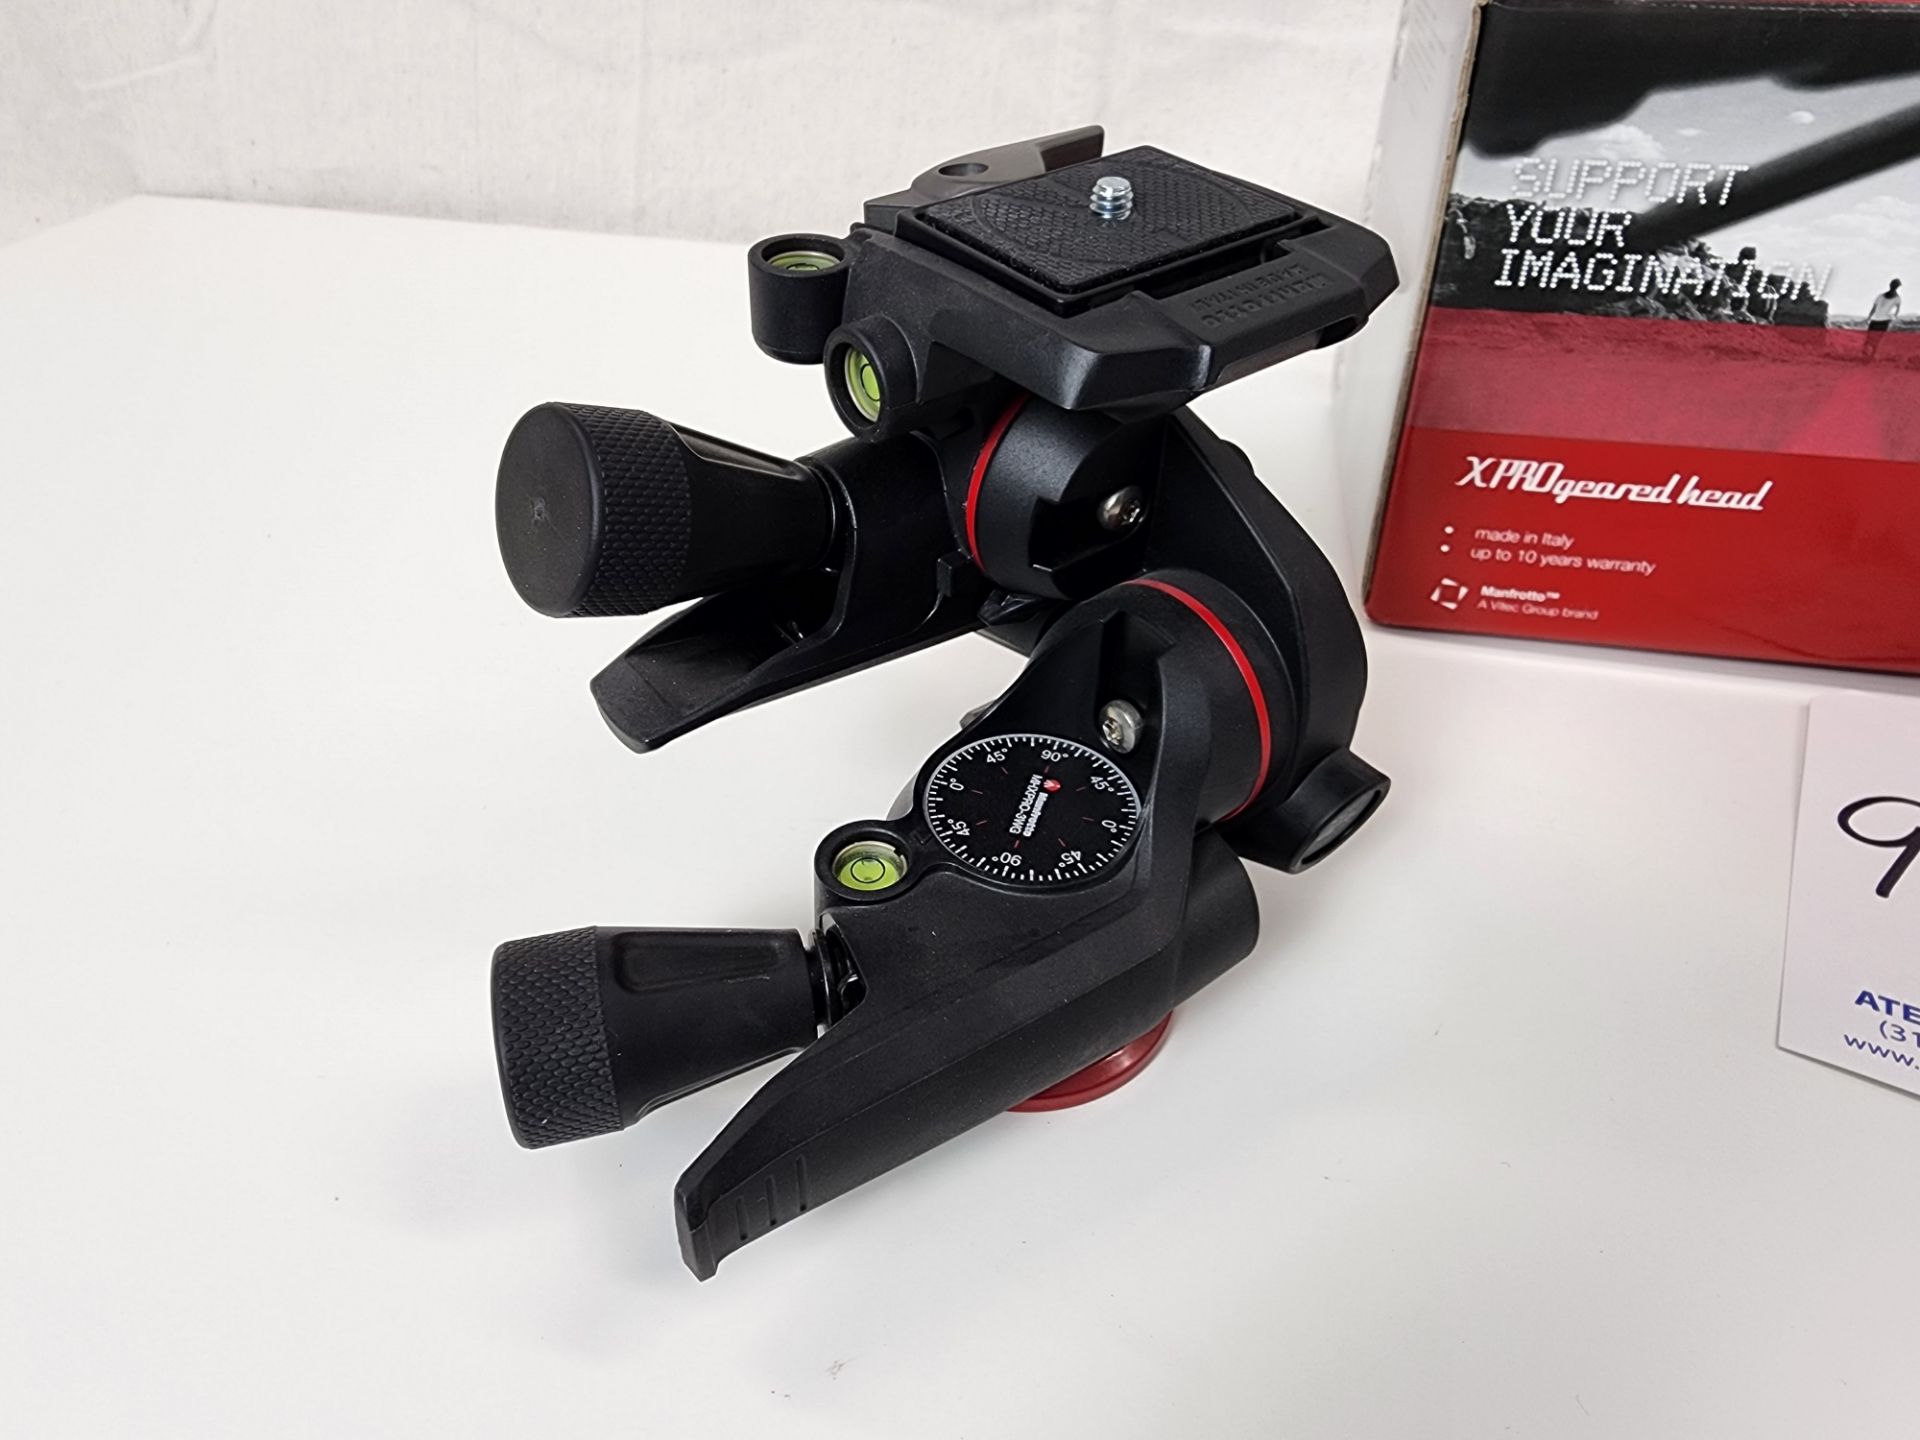 Manfrotto Model MHXPRO-3WG Geared 3-Way Pan & Tilt Tripod Head w/Quick Release & Original Box - Image 2 of 5